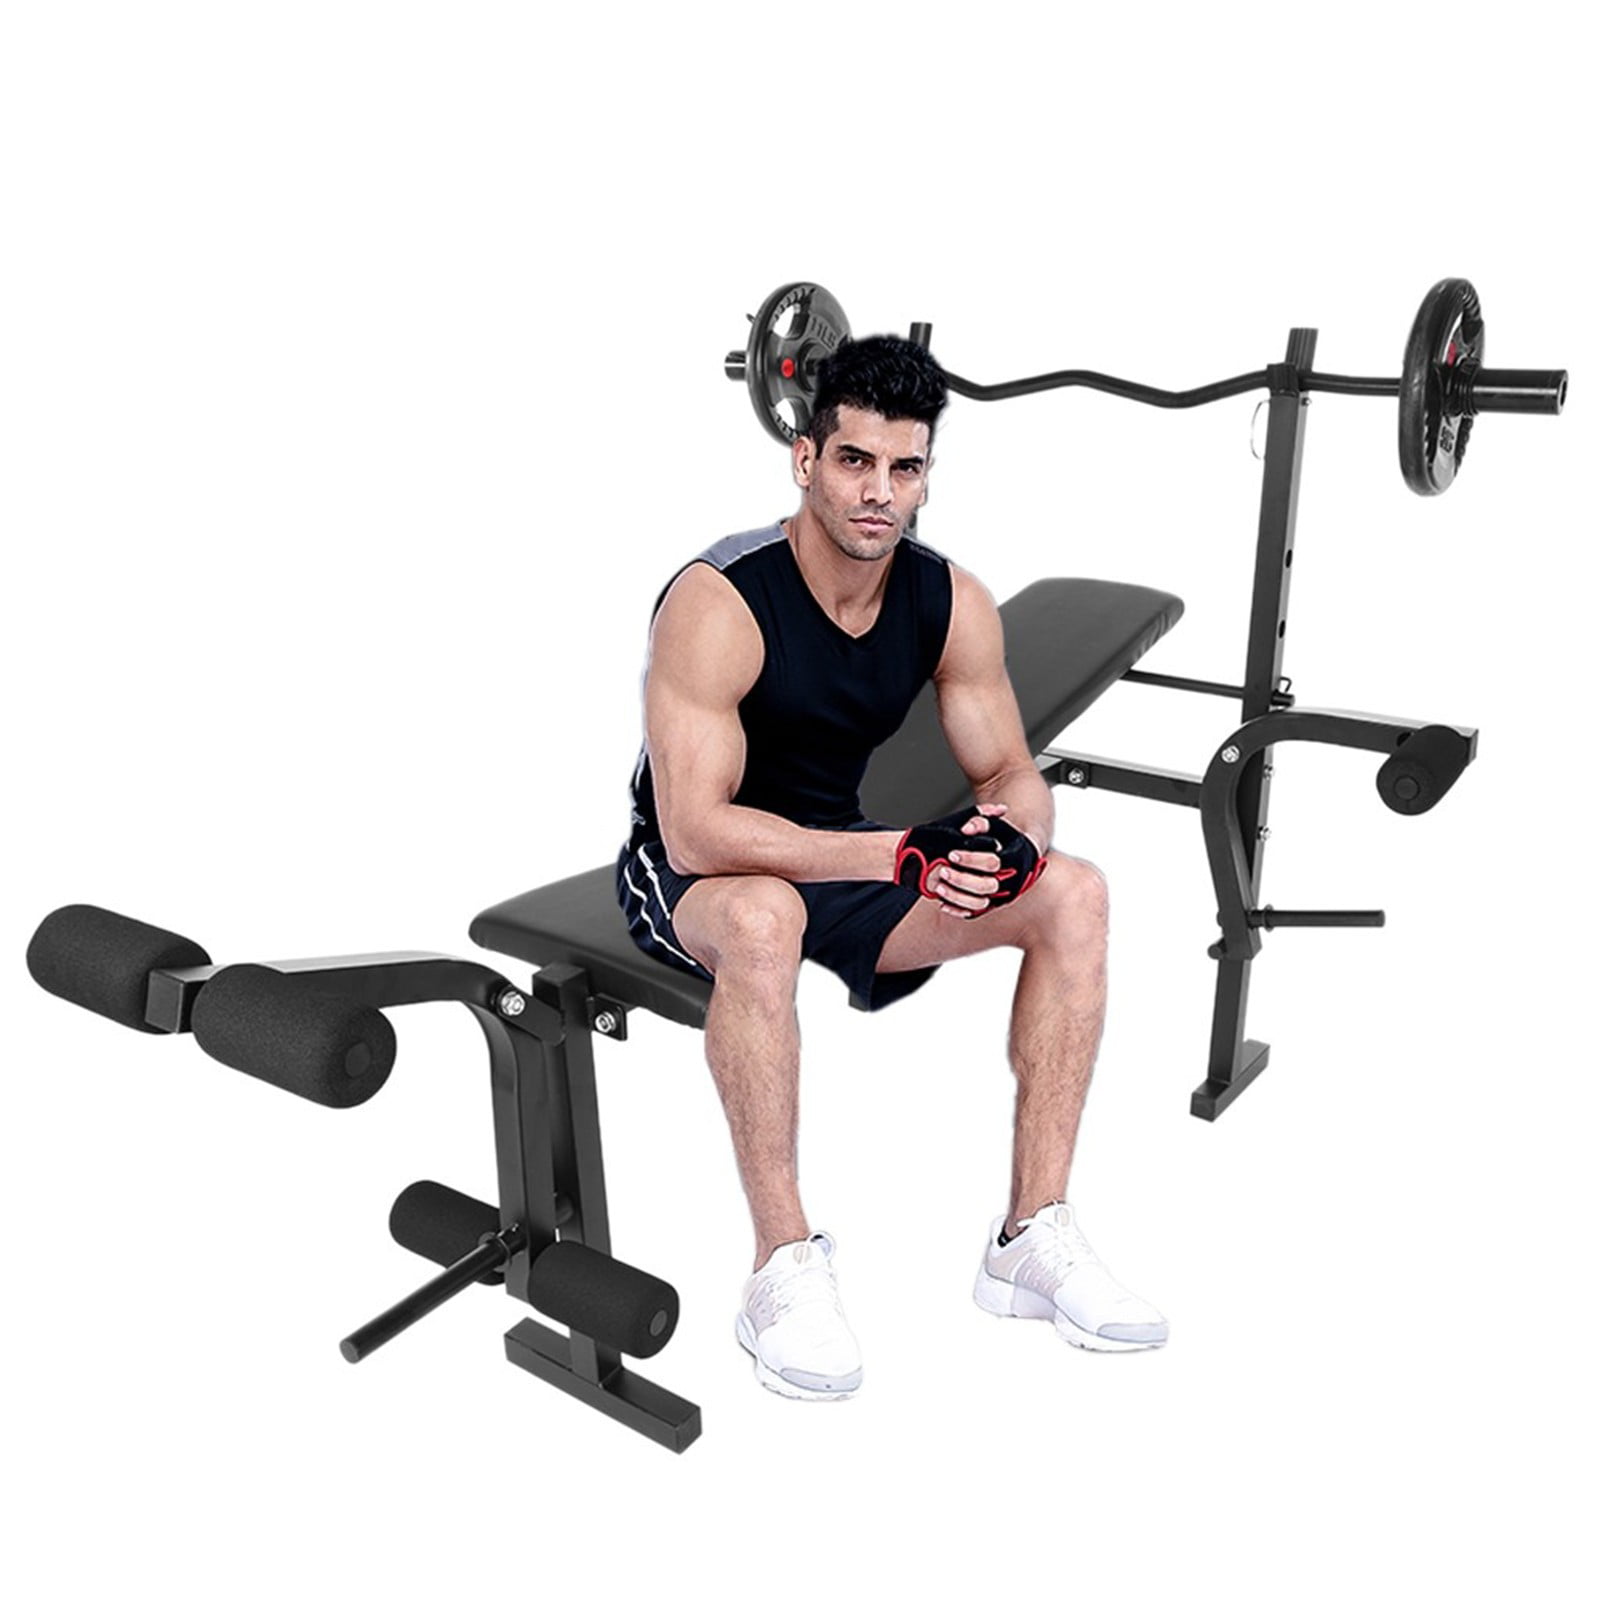 Weight Bench Barbell Lifting Press Gym Equipment Exercise Adjustable Incline US